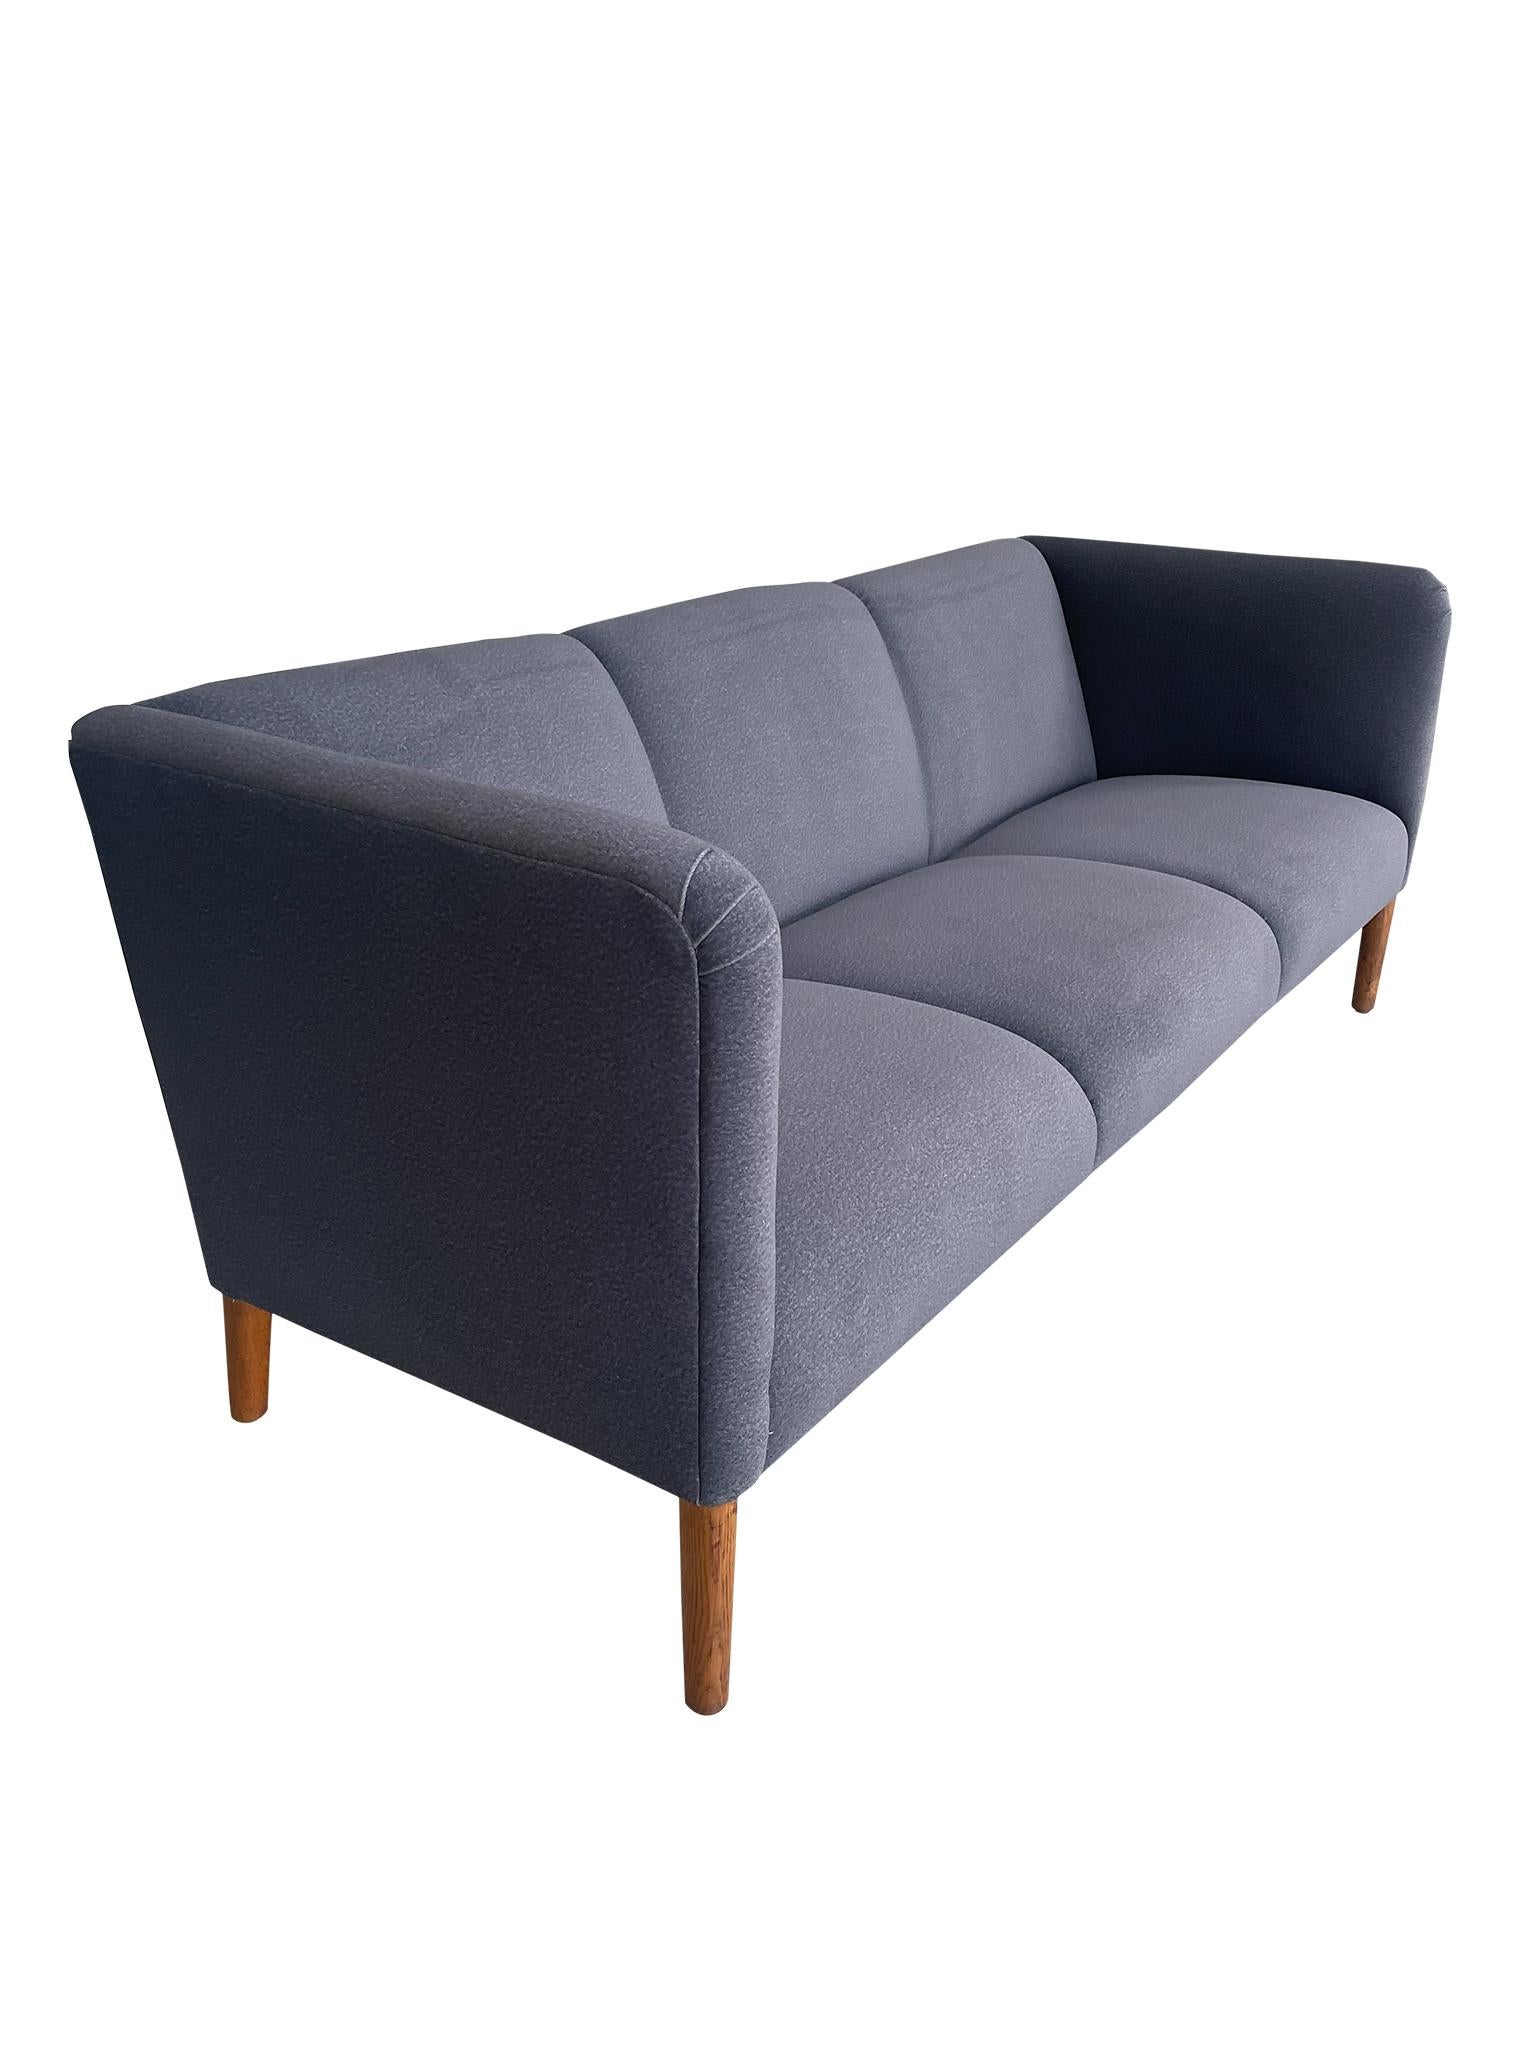 Beautiful Danish Modern Model AP18 Sofa by Prolific Mid-Century Furniture Designer Hans Wegner for AP Stolen. This Model AP18 Sofa is characterized by its sleek profile, three seats, and slightly reclined backrest. This sofa reflects the enduring